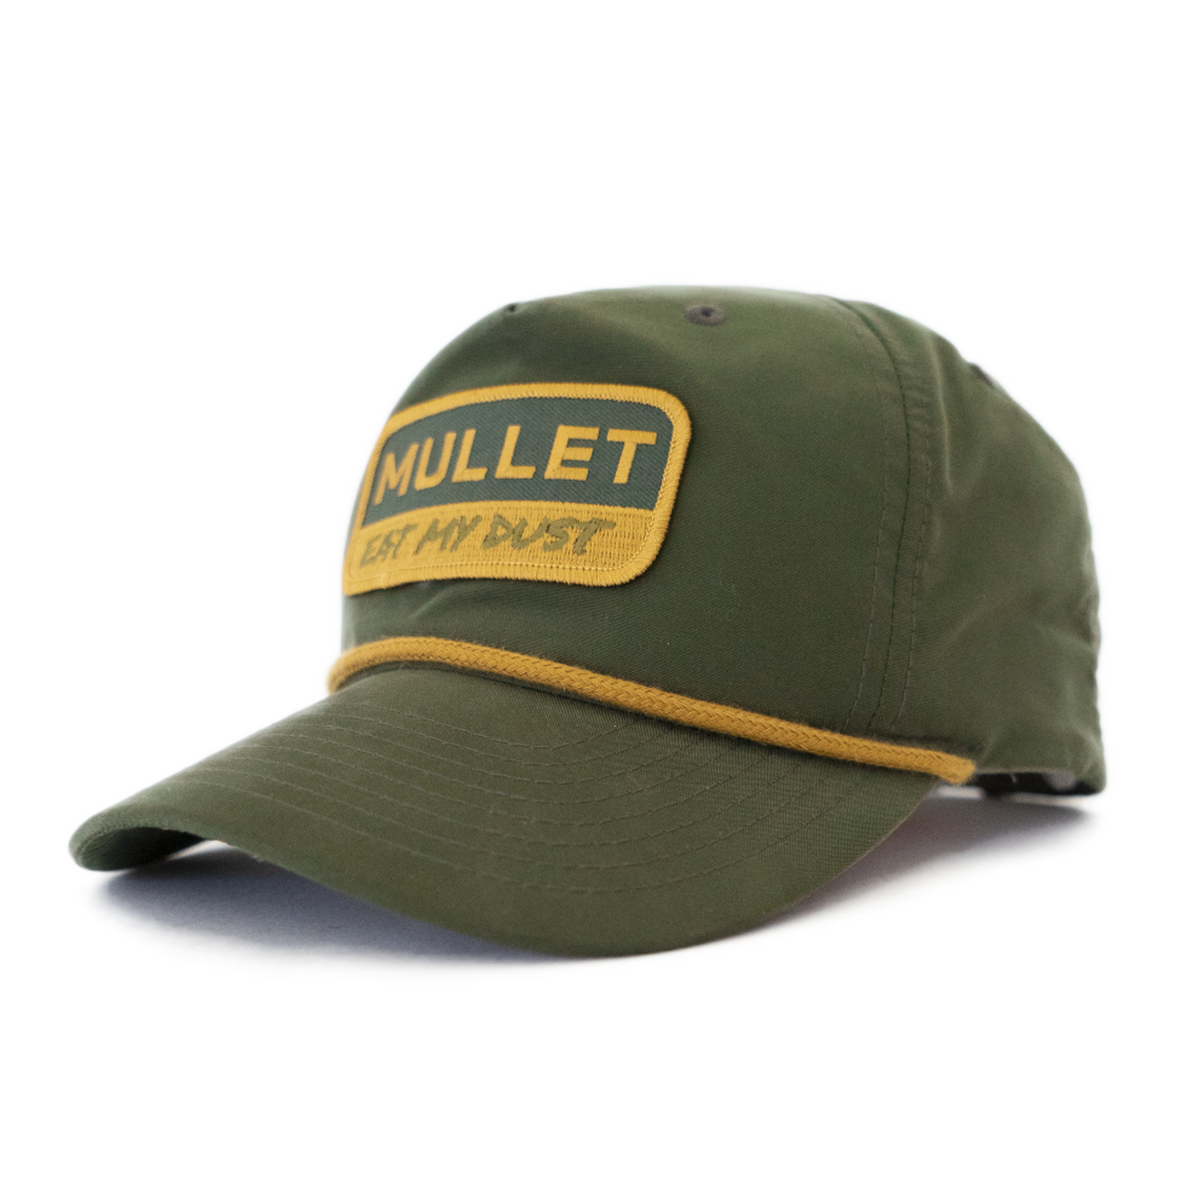 Mullet Eat My Dust Patch Rope Hat